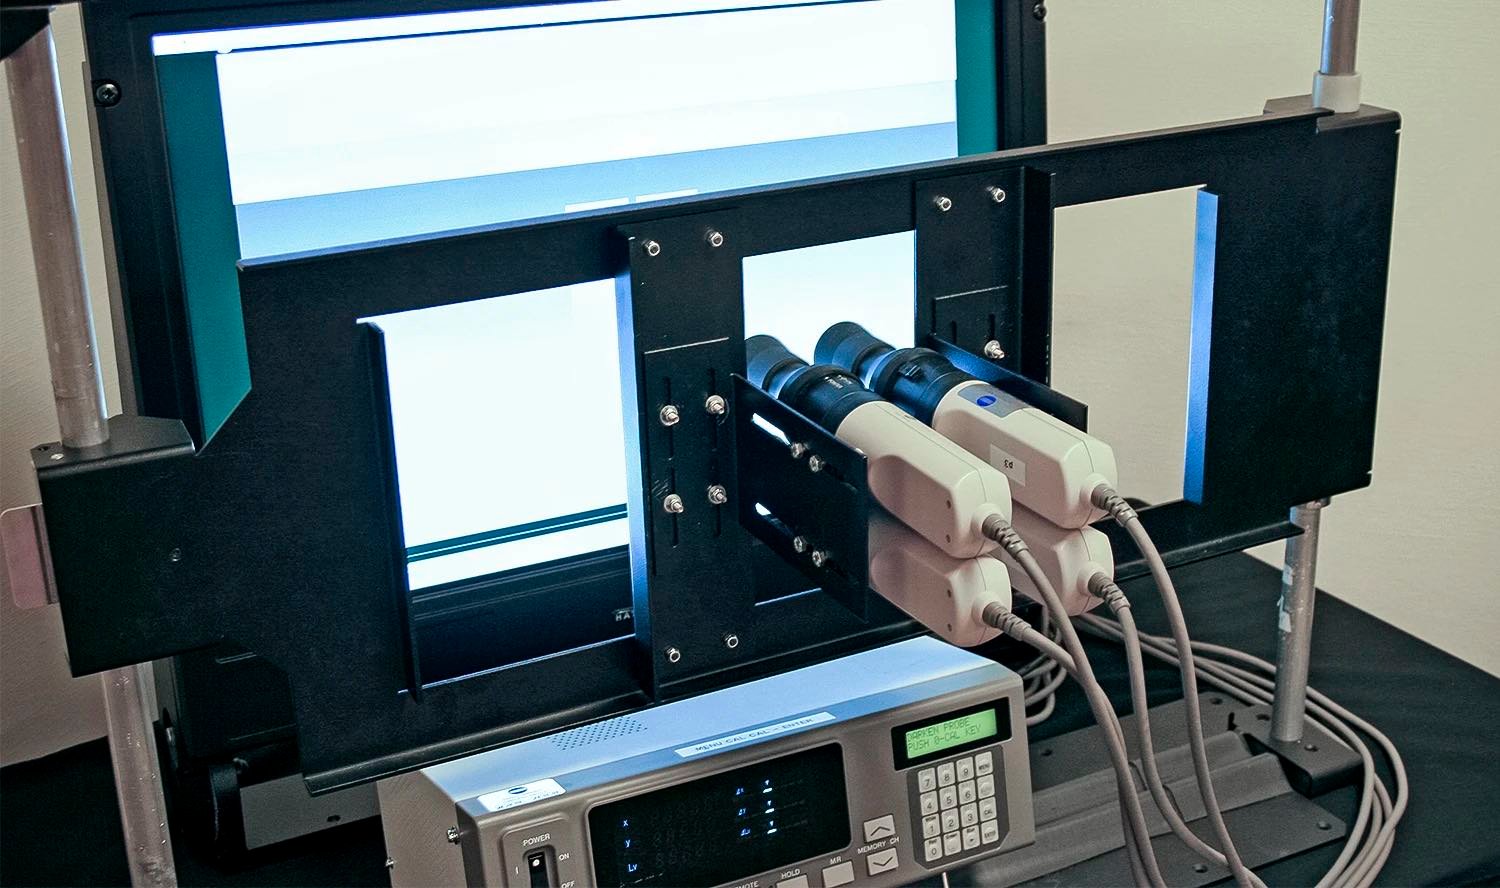 The image shows part of the color calibration setup at Hatteland Technology's production facilities. 